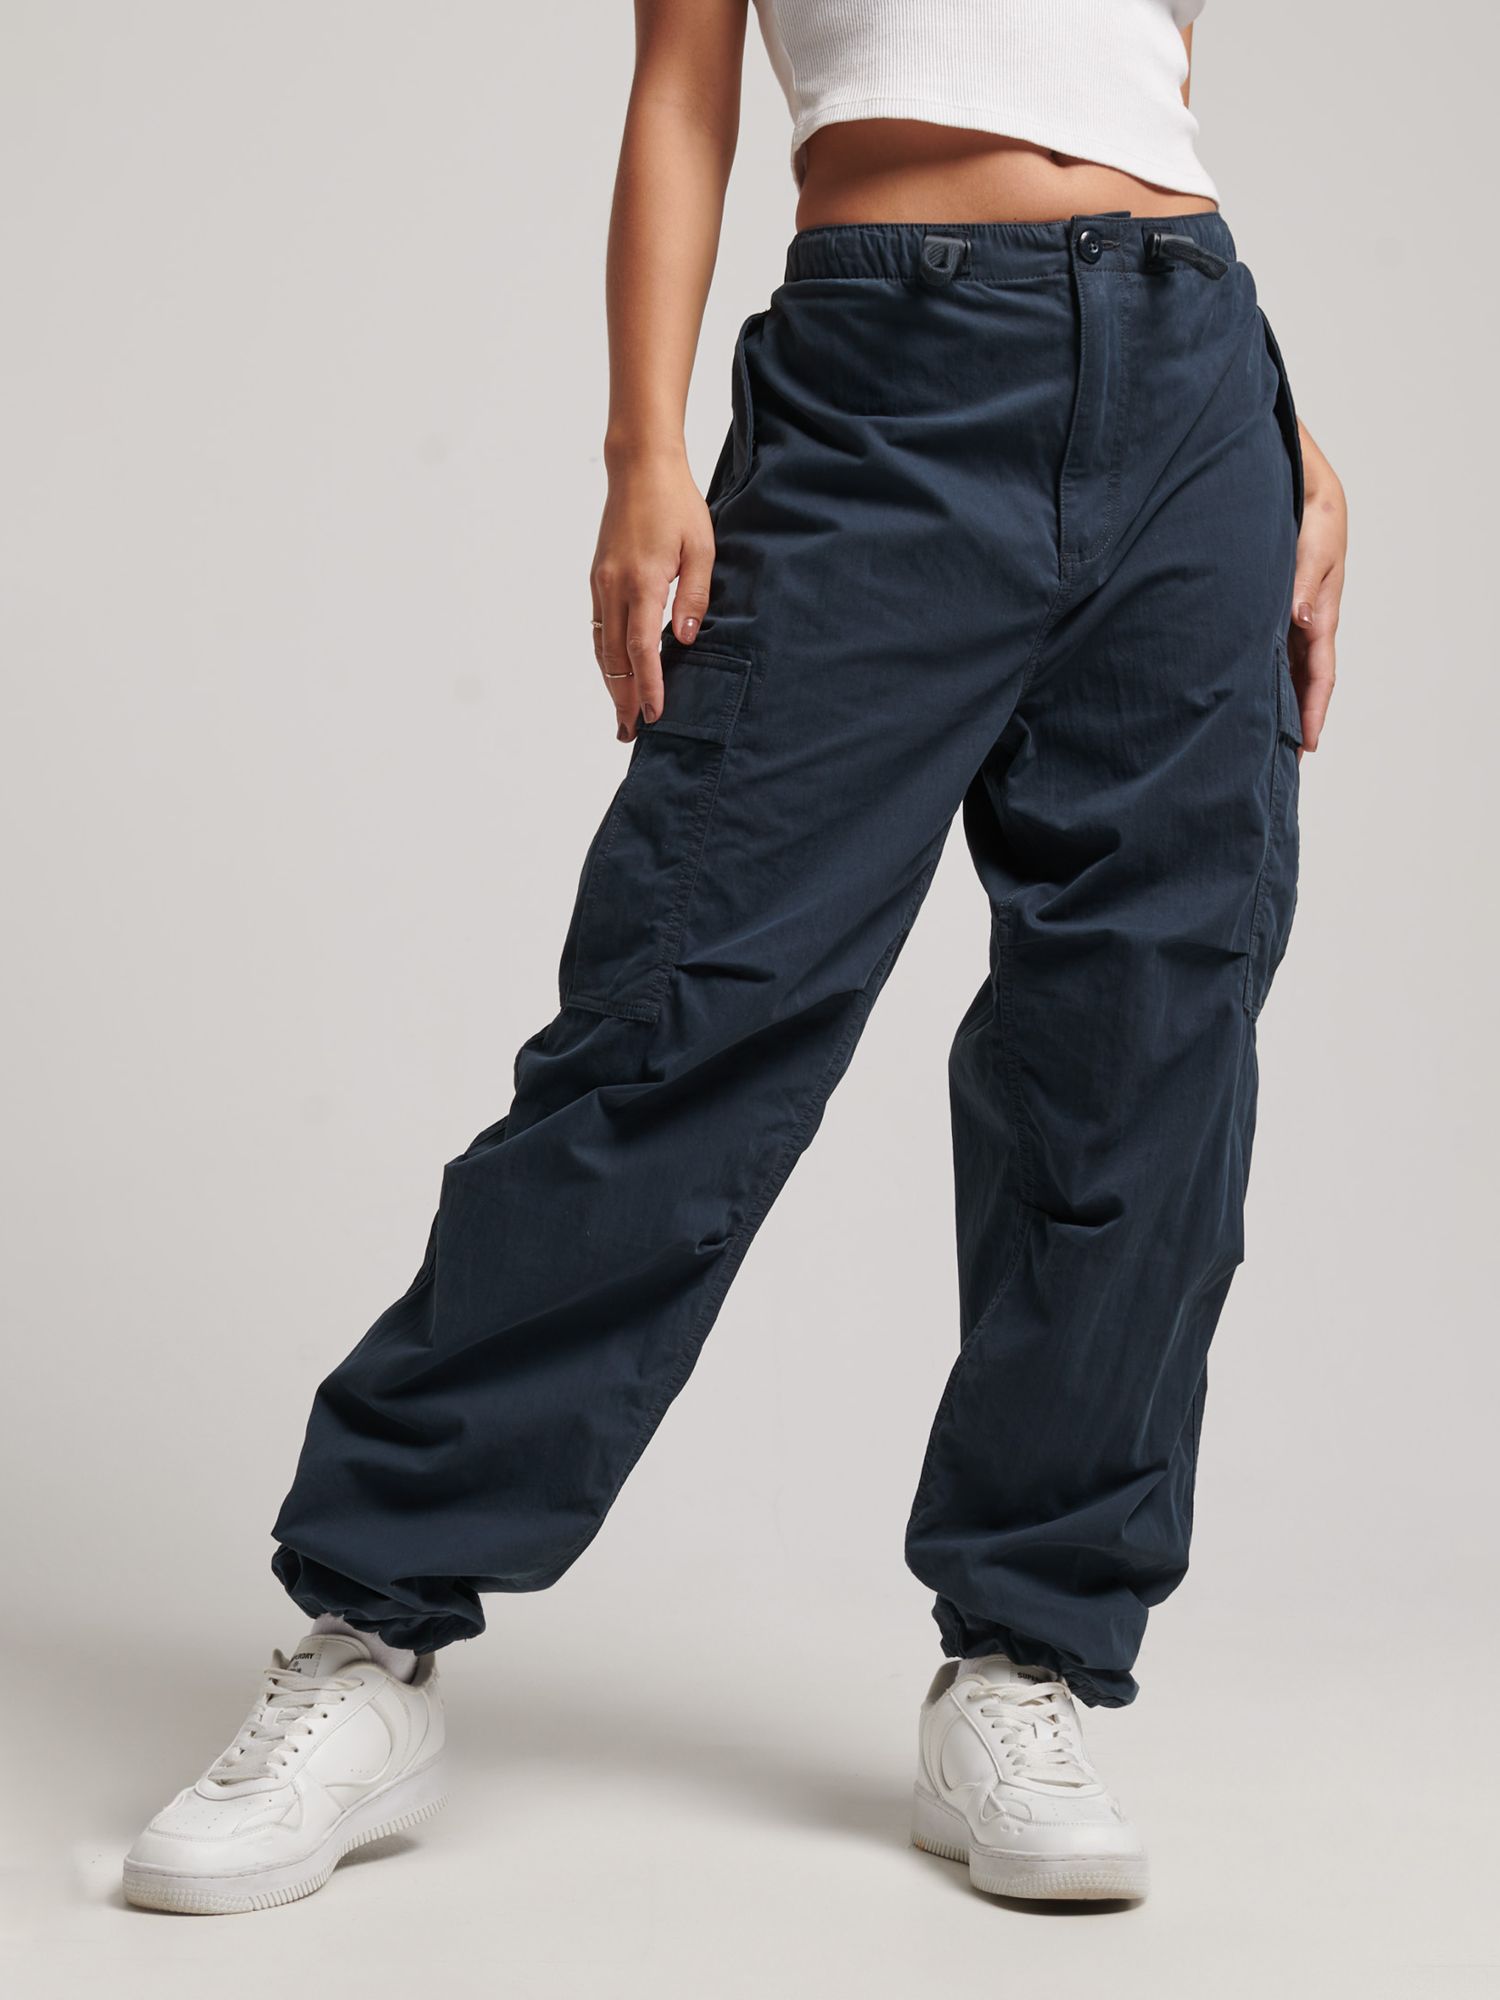 Superdry Parachute Grip Trousers, Midnight Navy at John Lewis & Partners